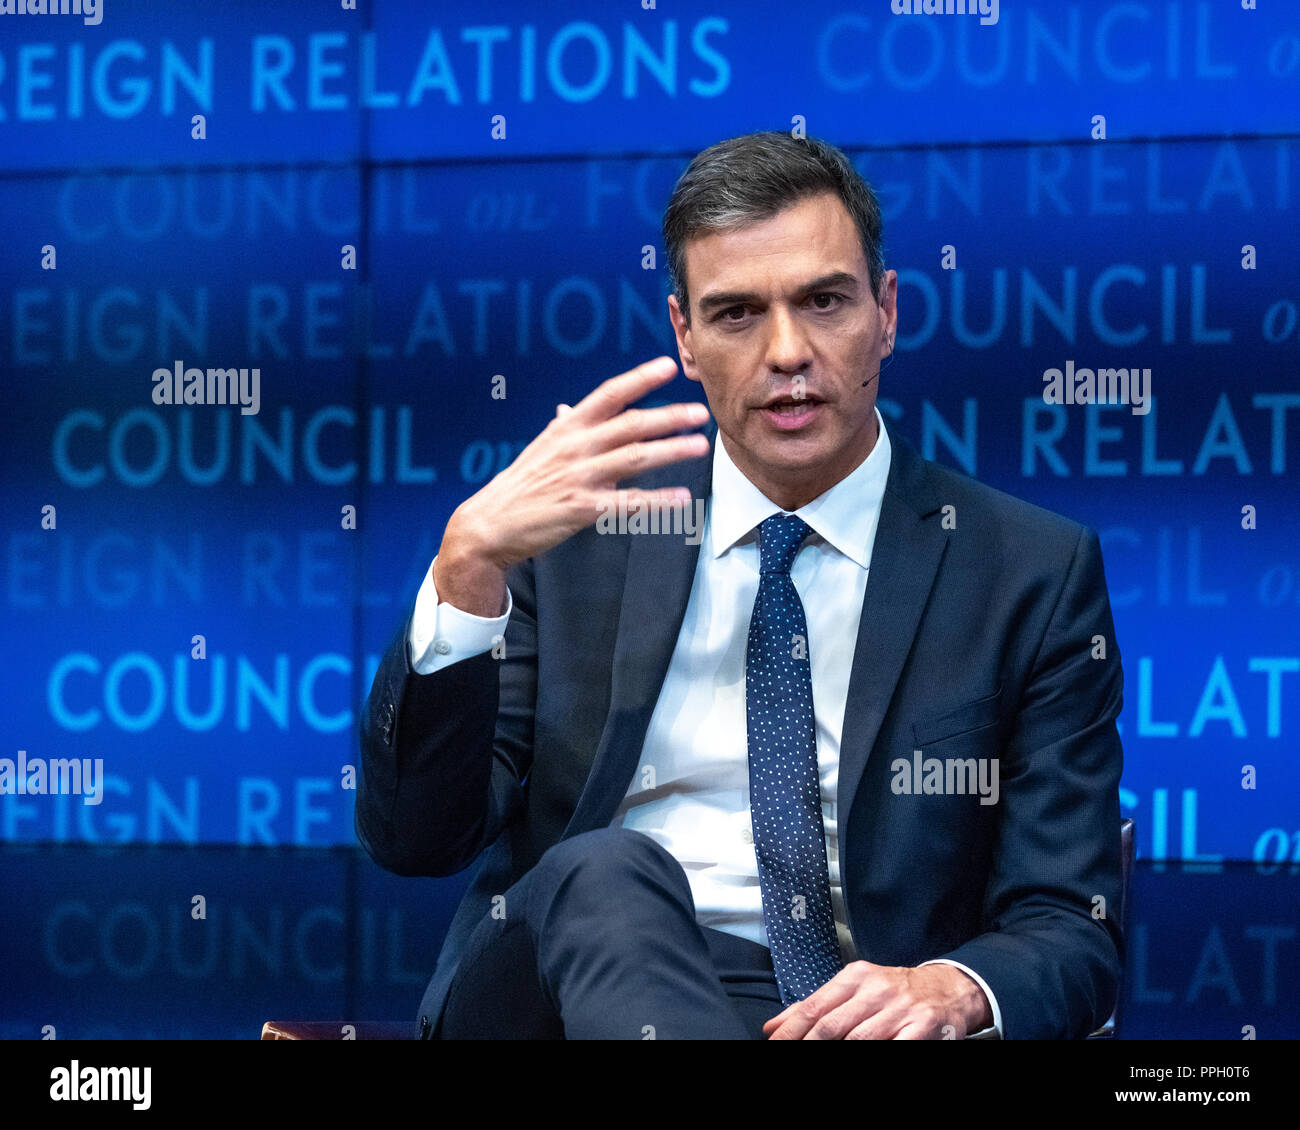 New York, USA, 25 September 2018.  Spanish Prime Minister Pedro Sanchez addresses an event at the Council on Foreign Relations in New York, on the sidelines of the 73rd United Nations General Assembly.  Photo by Enrique Shore Credit: Enrique Shore/Alamy Live News Stock Photo